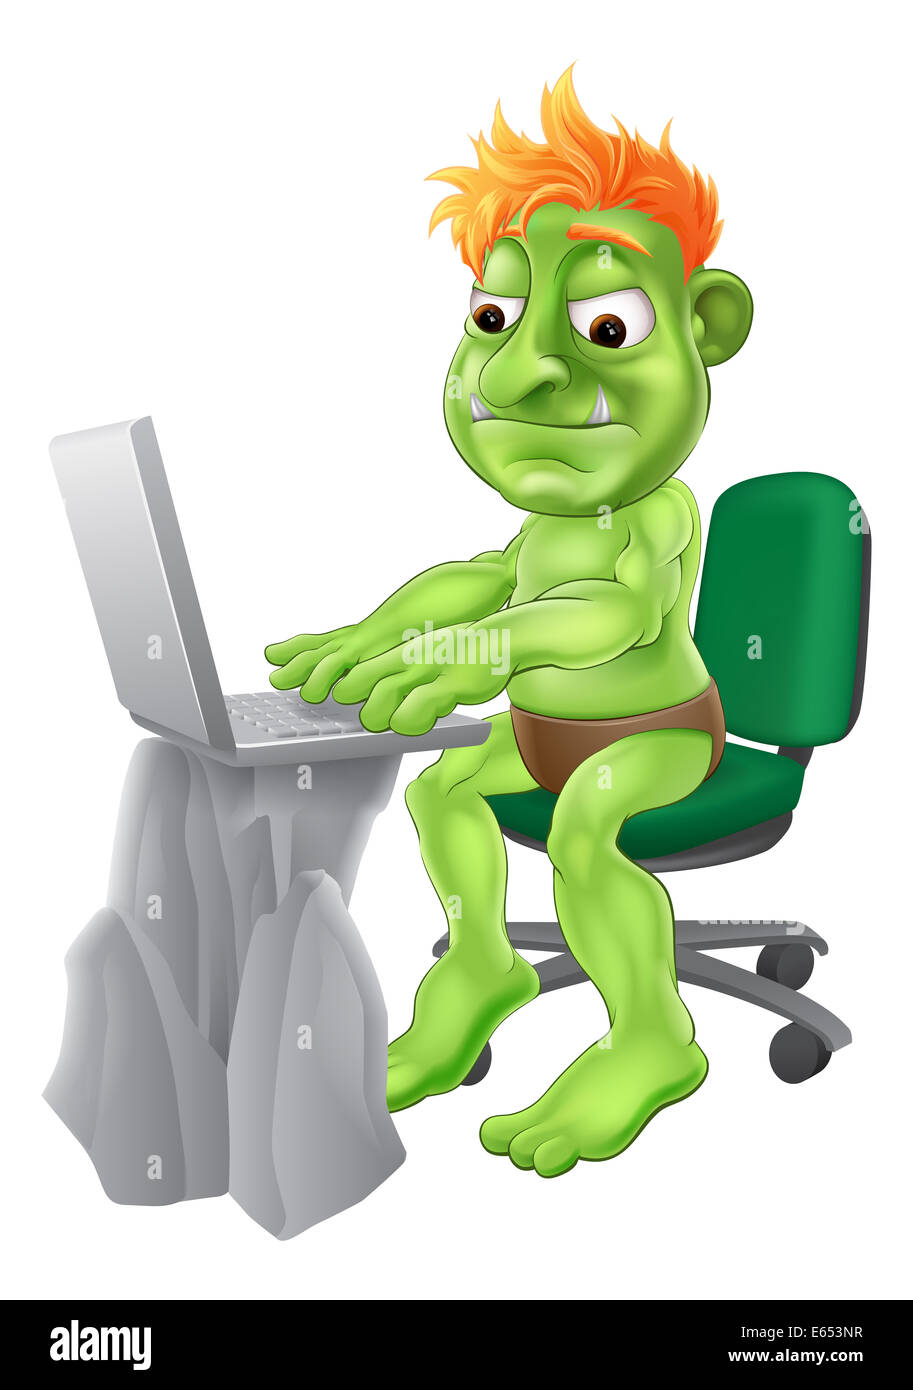 An illustration of a green monster troll character typing on their laptop. Concept for an internet troll Stock Photo